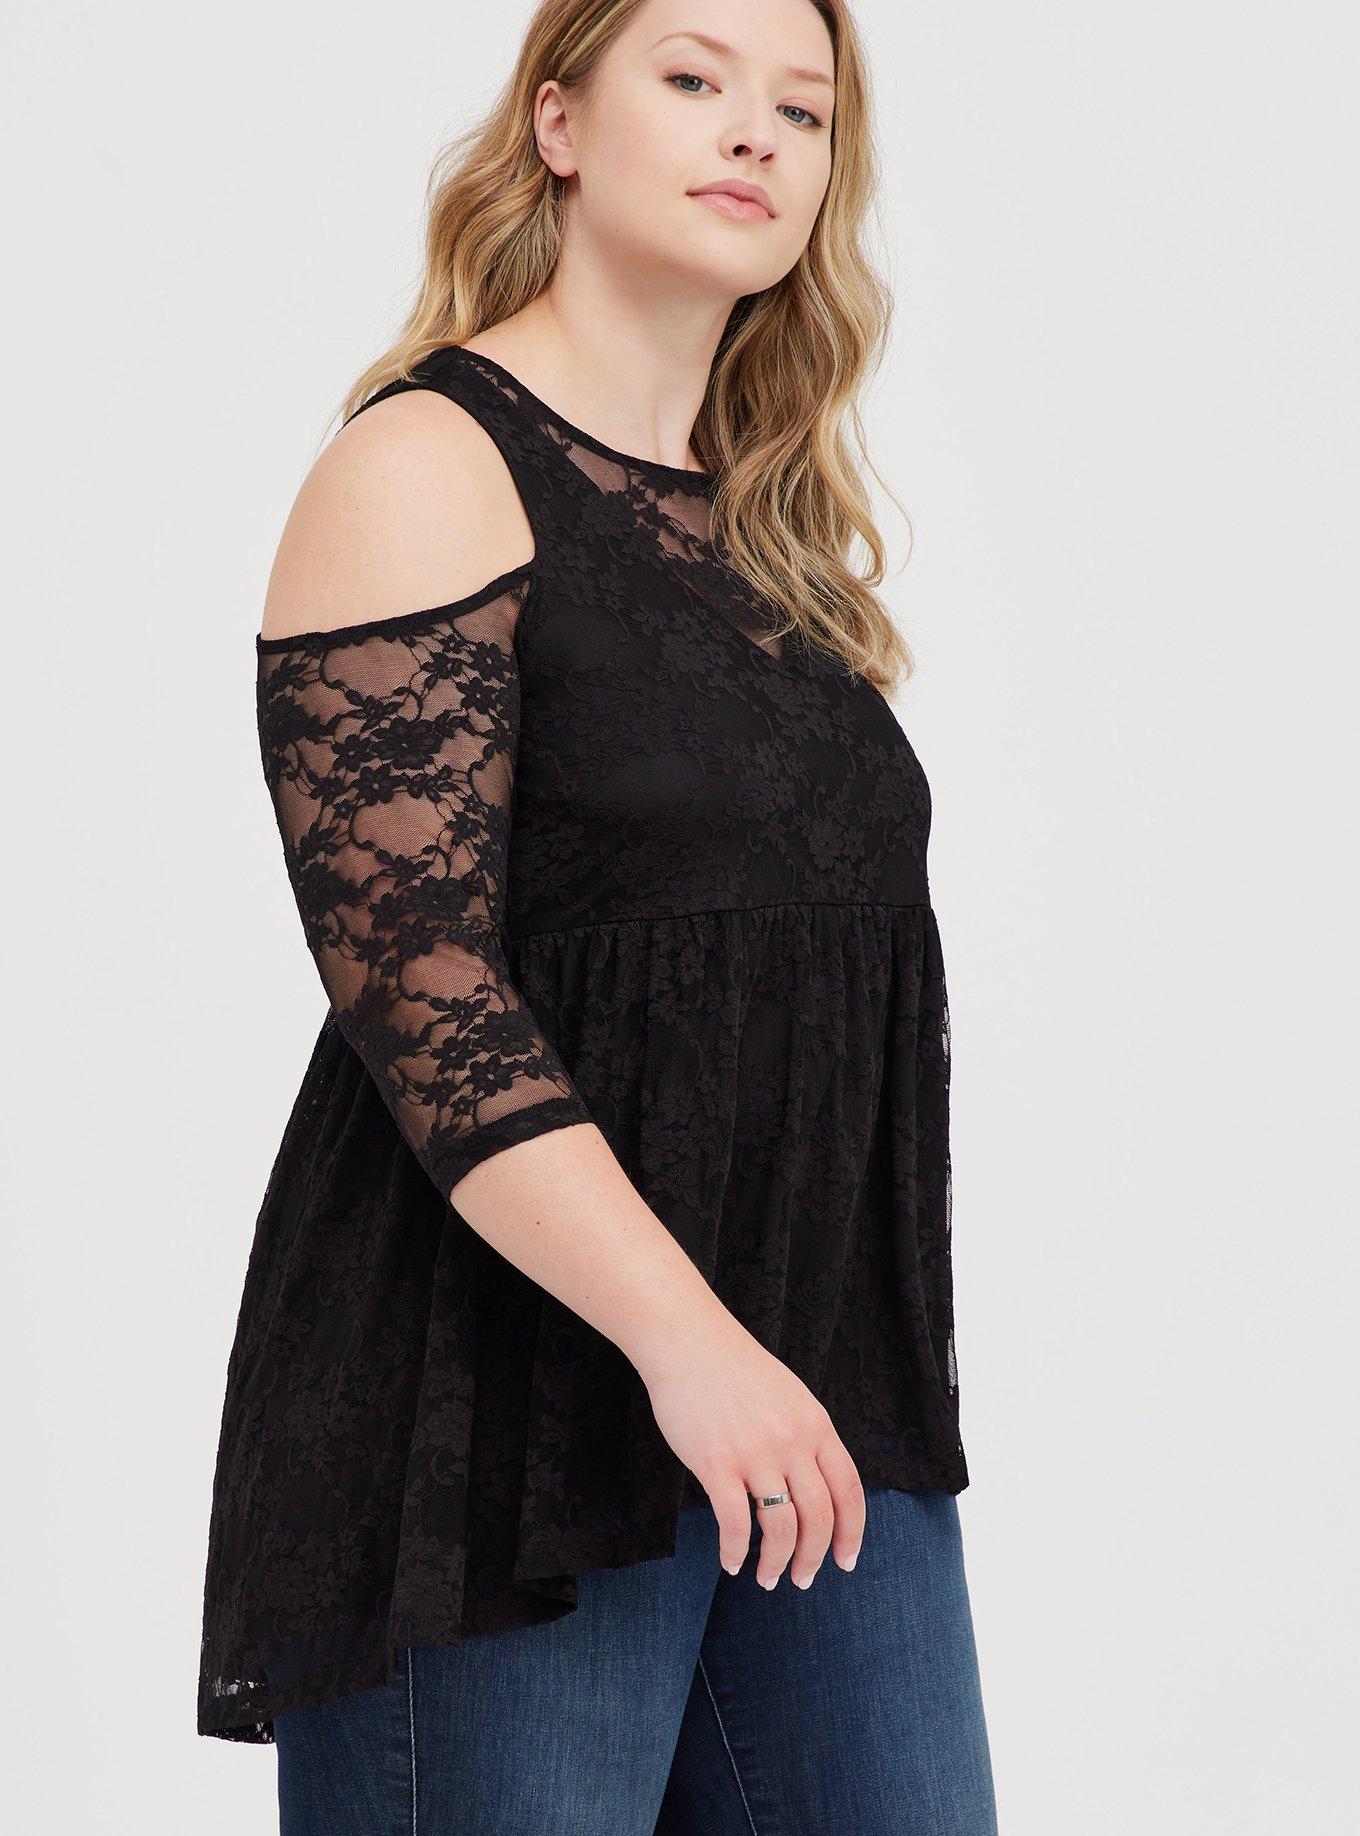 Lace Tops for Women Suitable,Shopping Online Website,Todays Deals Sweater,  oct 11 and 12, Under $25,Womens Blouse Under 20.00,add on Items Under 1